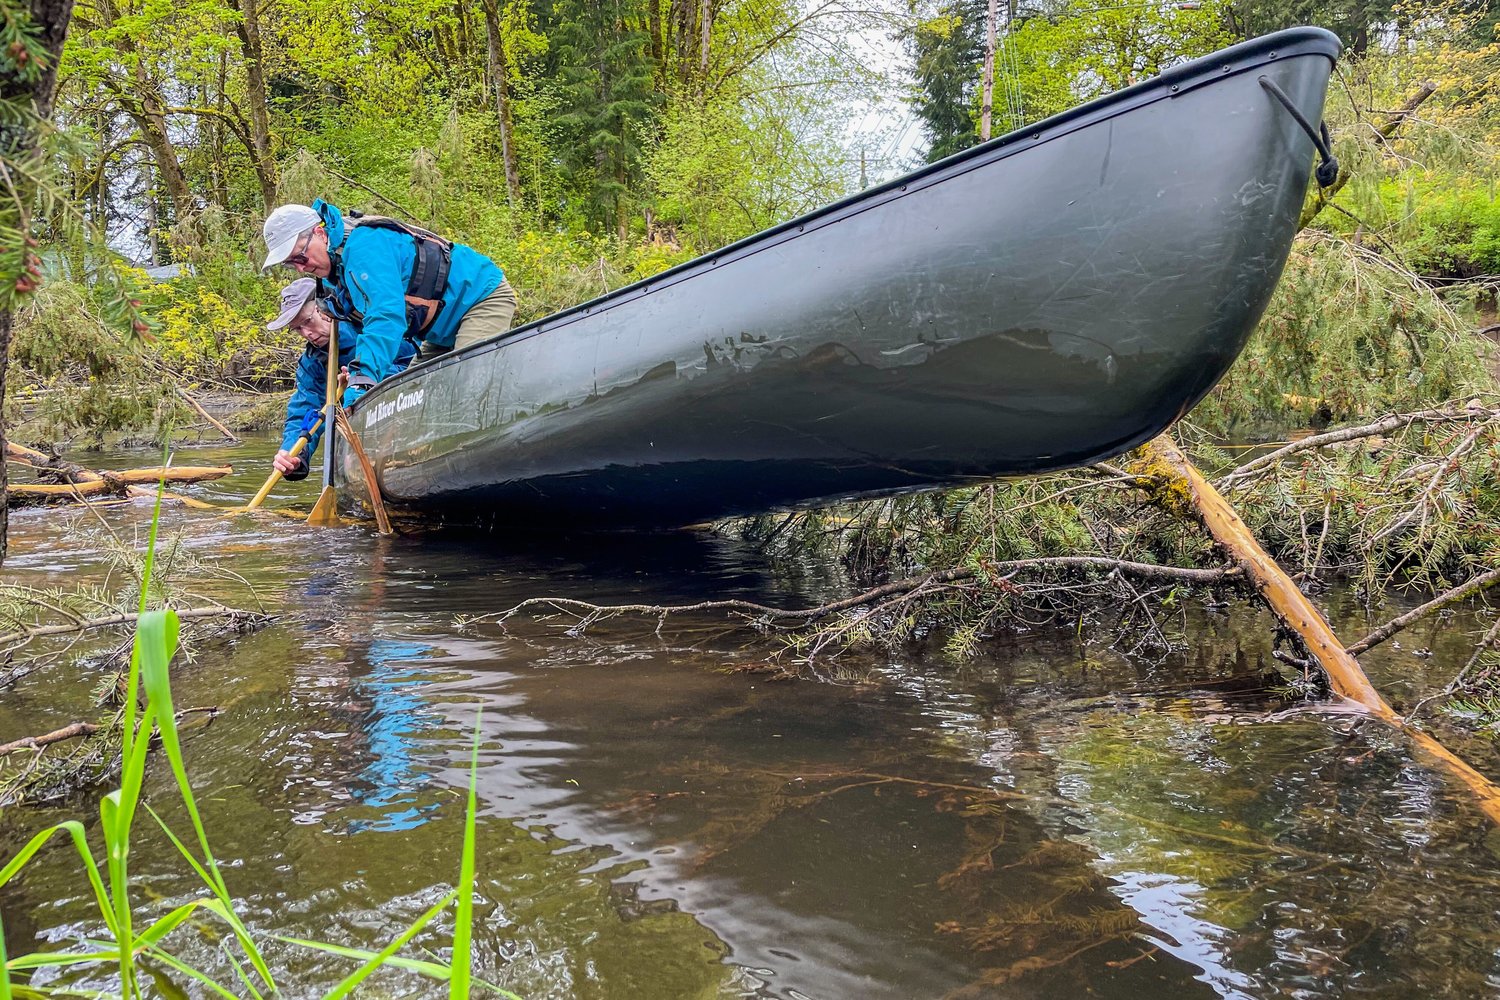 Geomorphologist Paul Bakke and Lee First, an environmental activist, work to maneuver their canoe through a downed tree along the Black River.